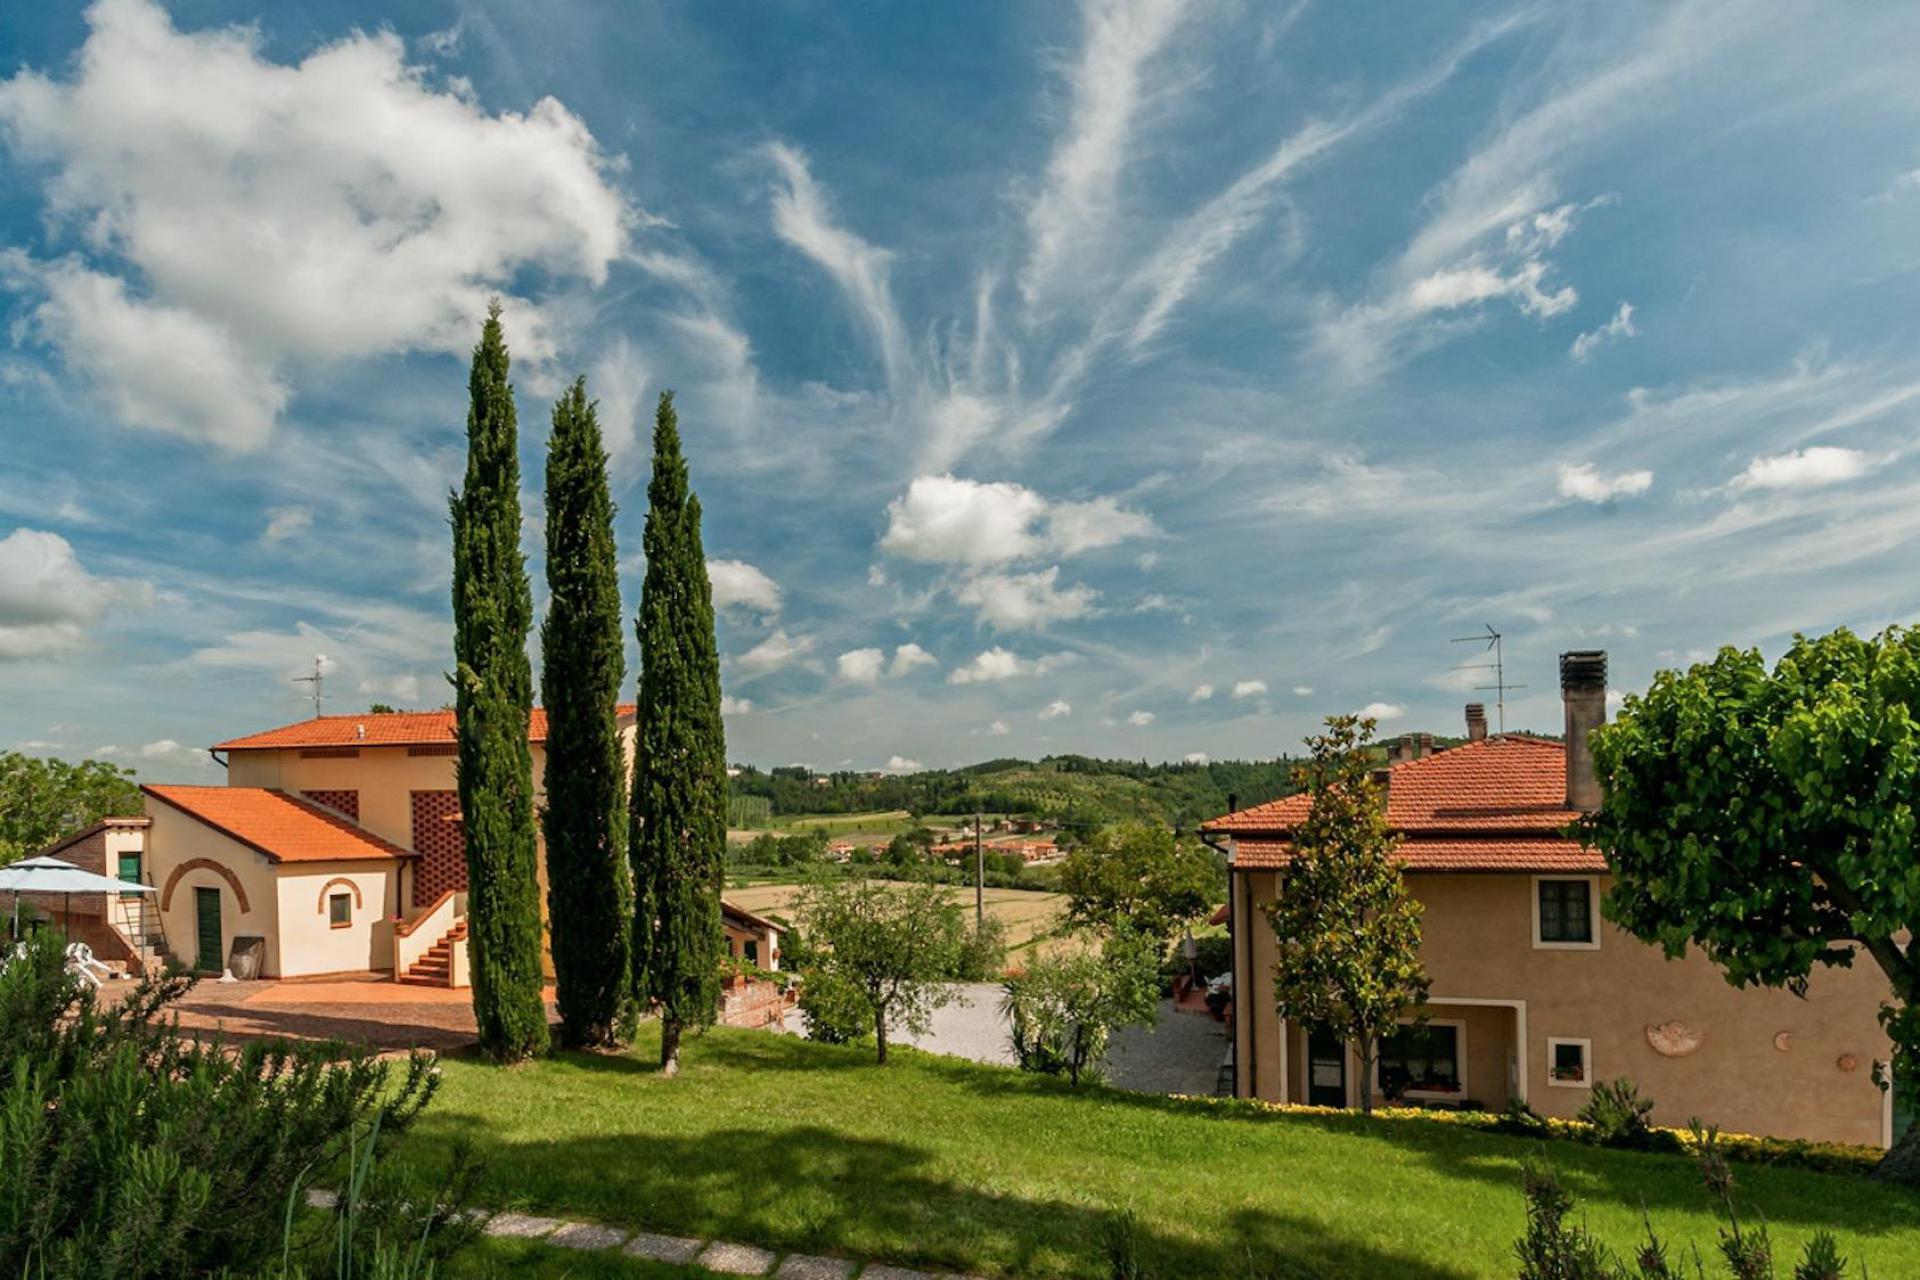 Family agriturismo with nice facilities